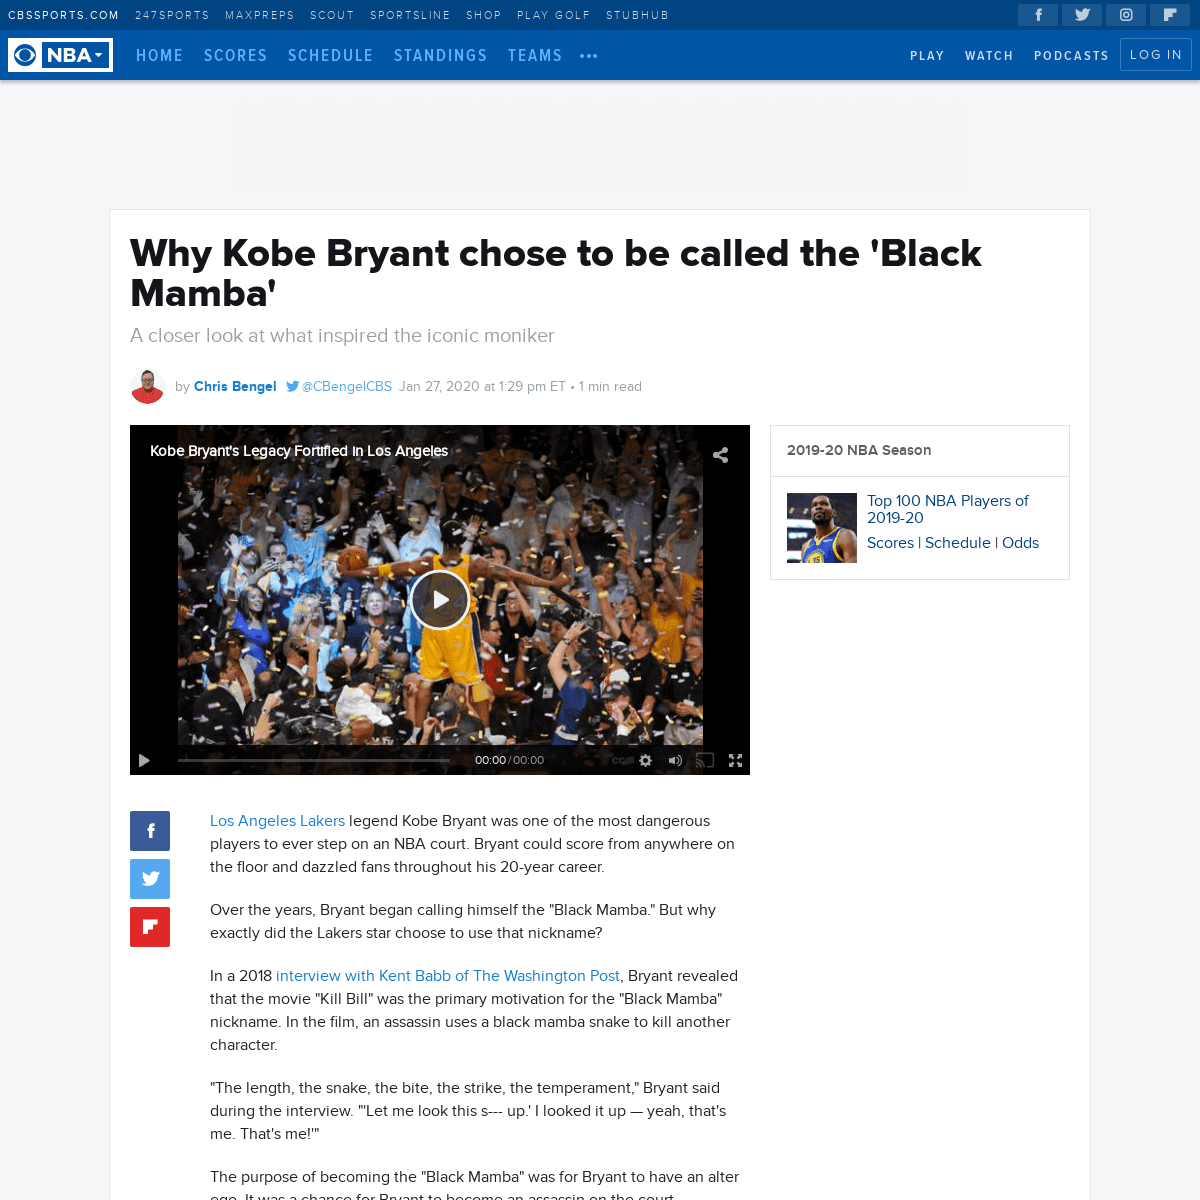 A complete backup of www.cbssports.com/nba/news/why-kobe-bryant-chose-to-be-called-the-black-mamba/